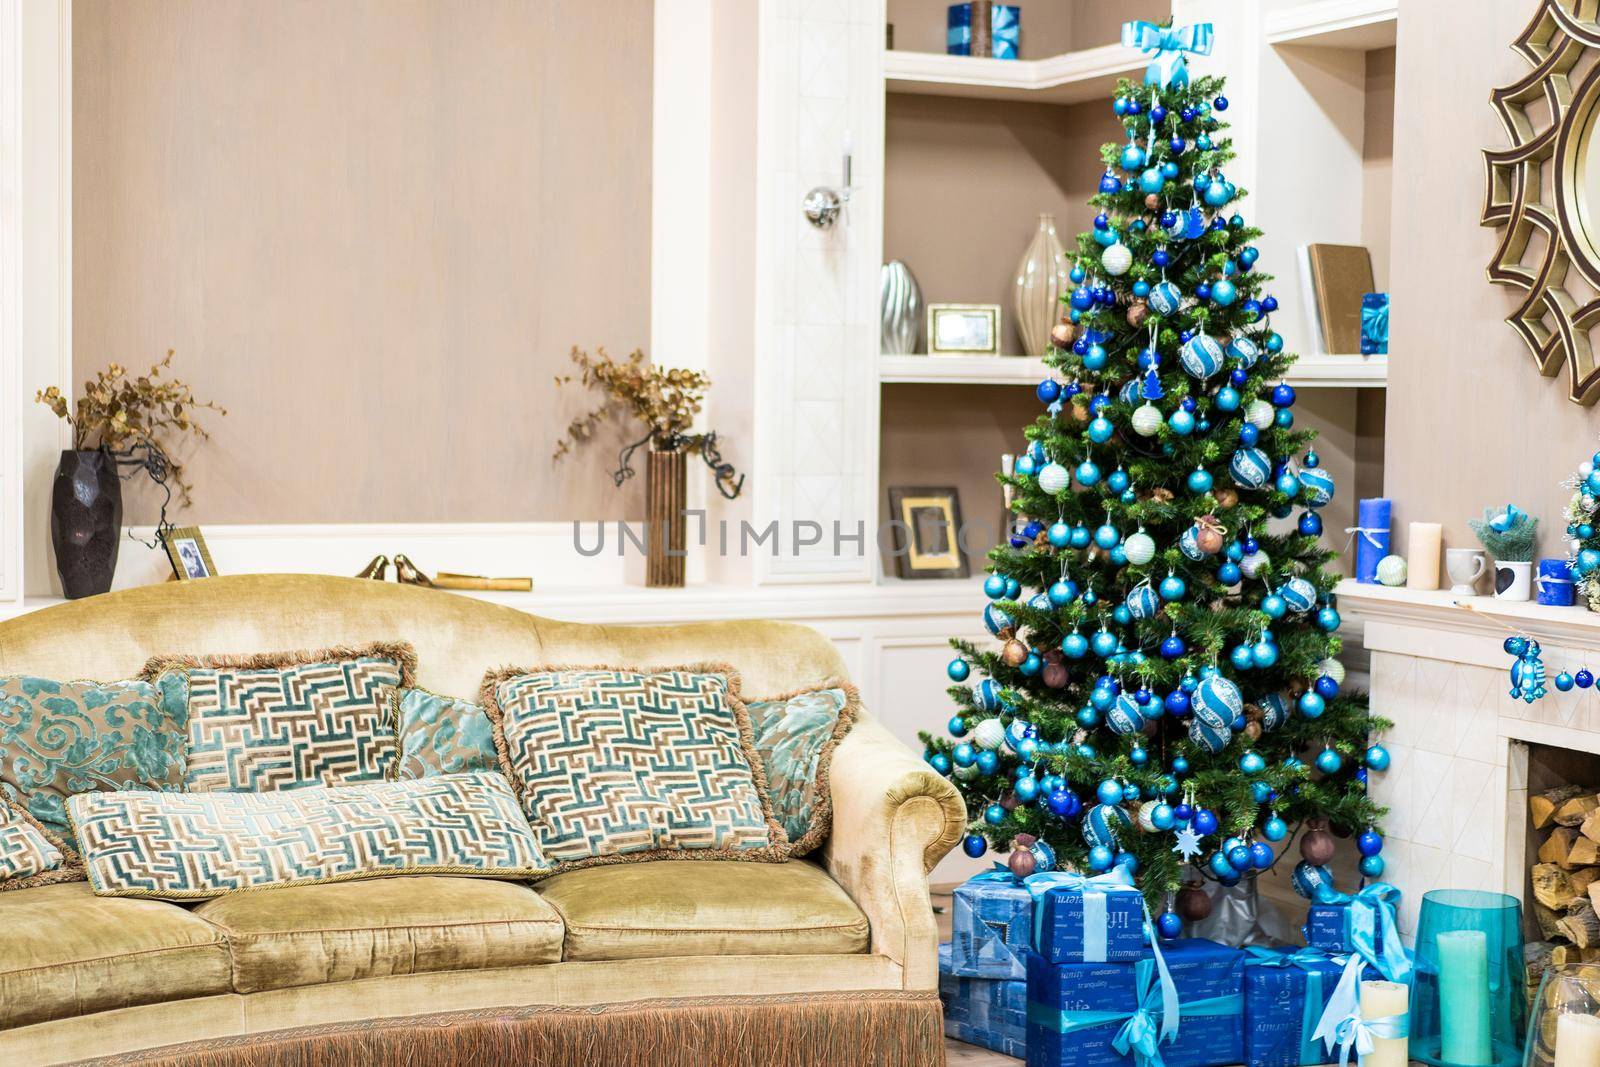 Beautiful New Year Interior with Christmas Tree in Corner. Couch with Pillows and Green Christmas Tree with Beautiful Presents by LipikStockMedia